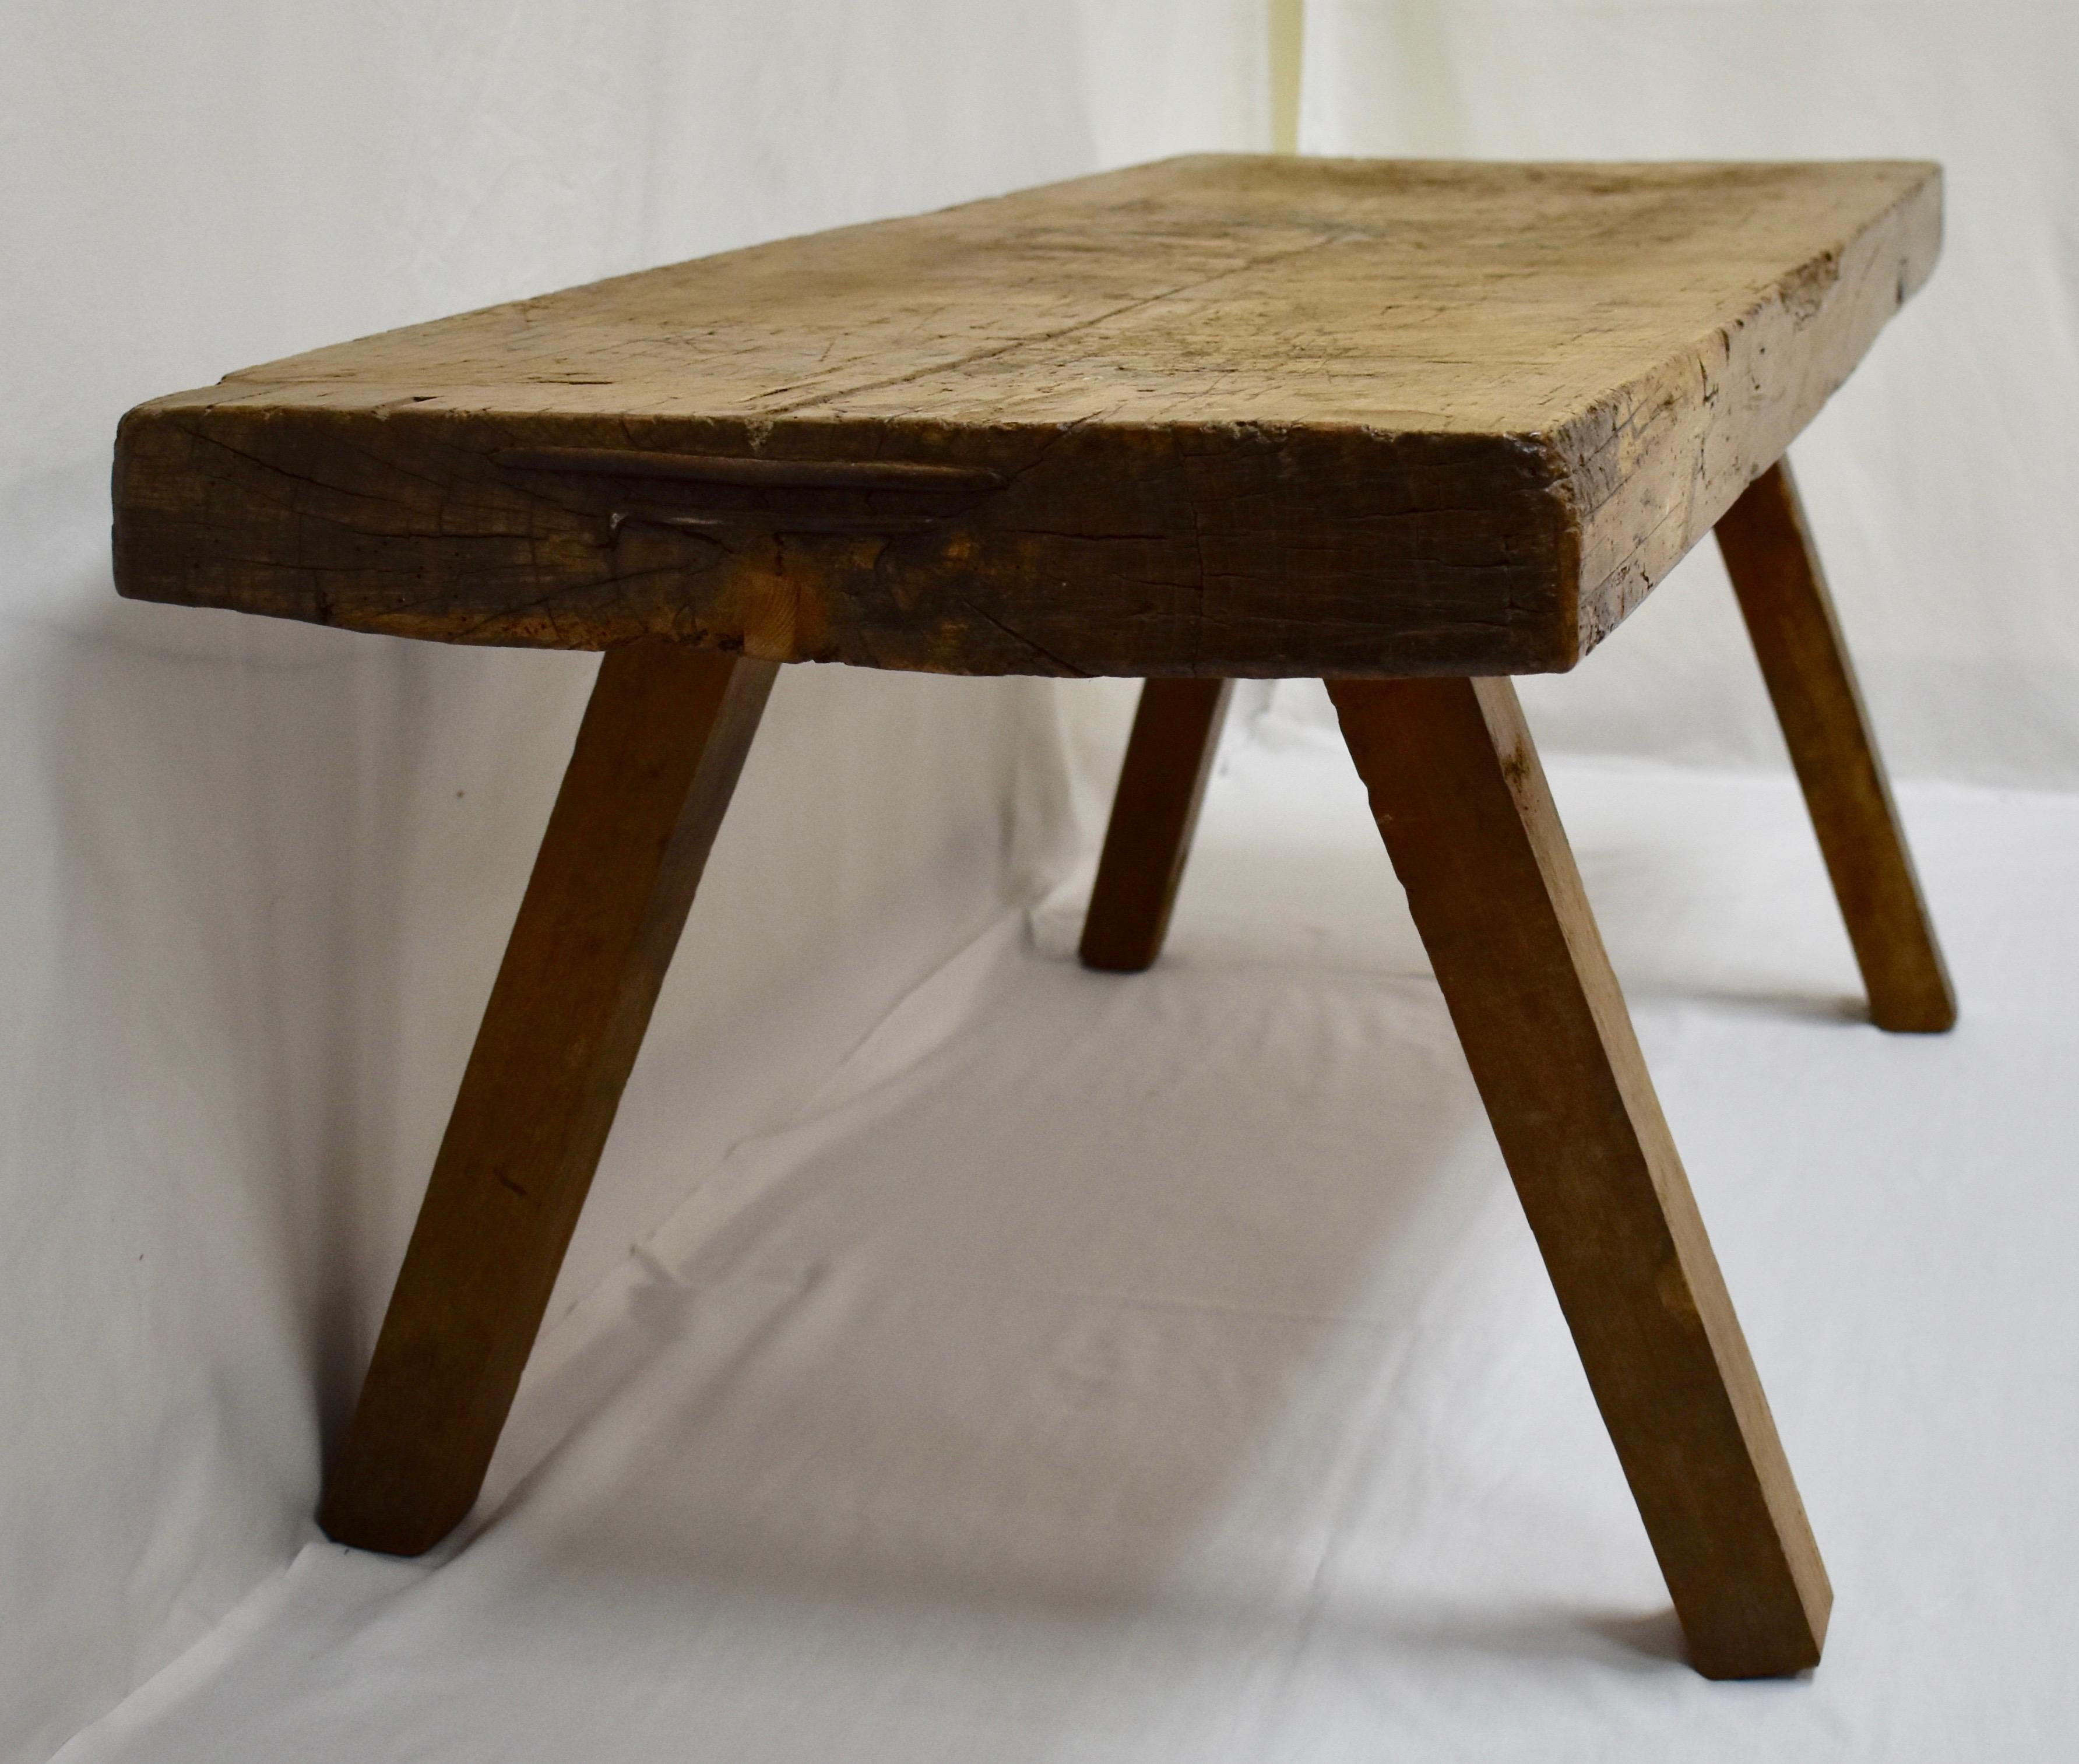 Rustic Oak Pig Bench Coffee Table